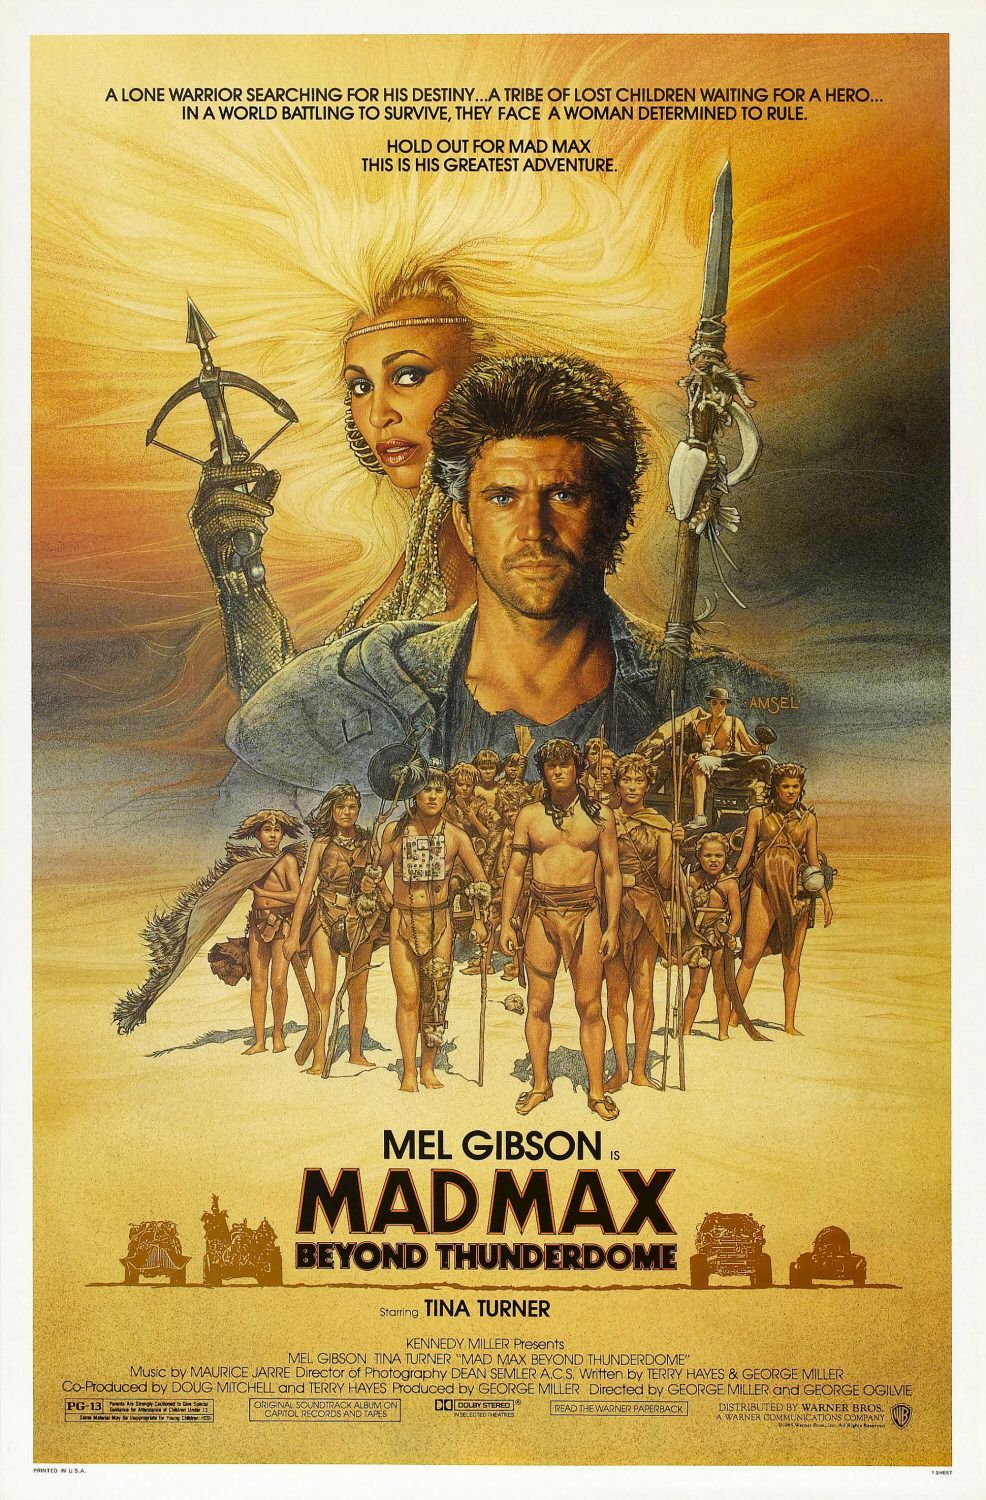 Movie poster for “Mad Max Beyond Thunderdome”